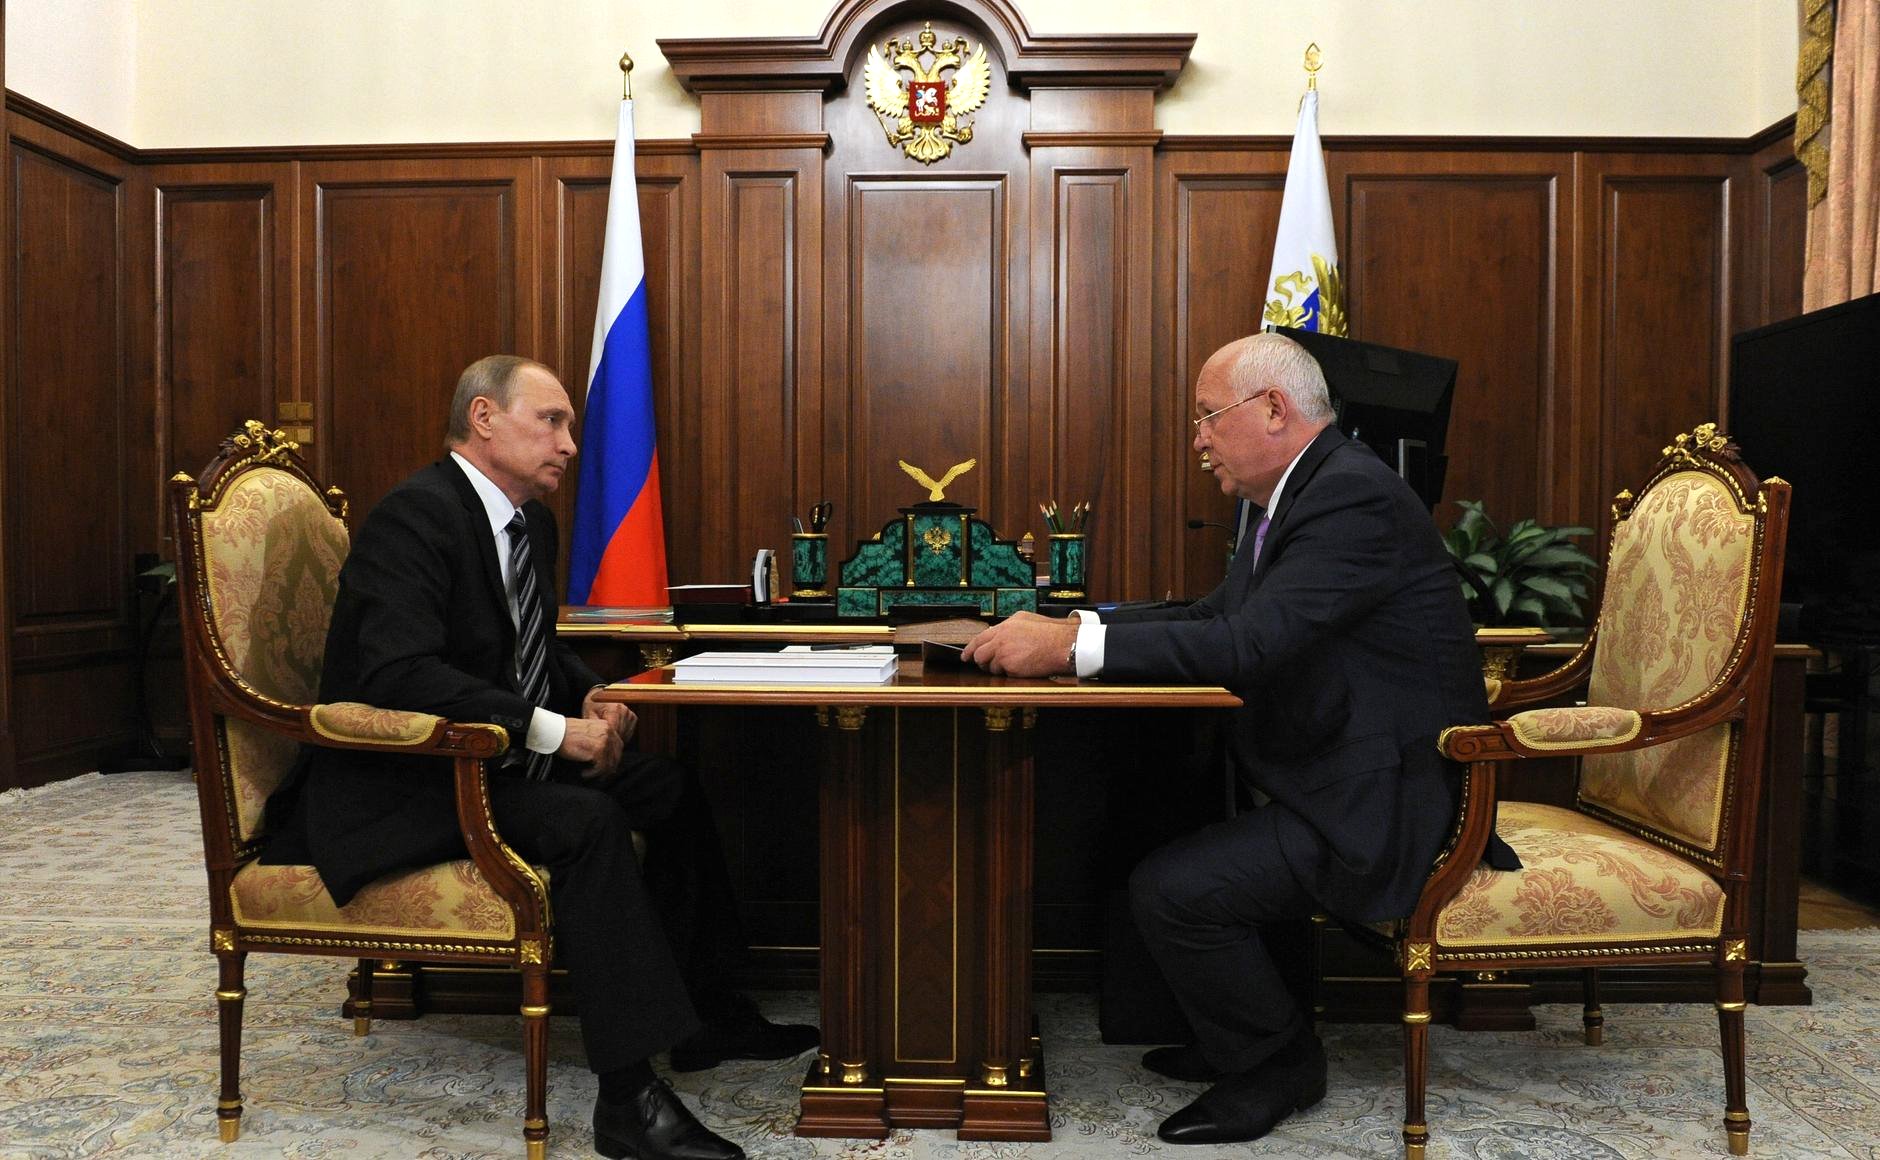 Sergey Chemezov reported to Vladimir Putin that Rostec has met the sanctions and achieved the planned growth rates